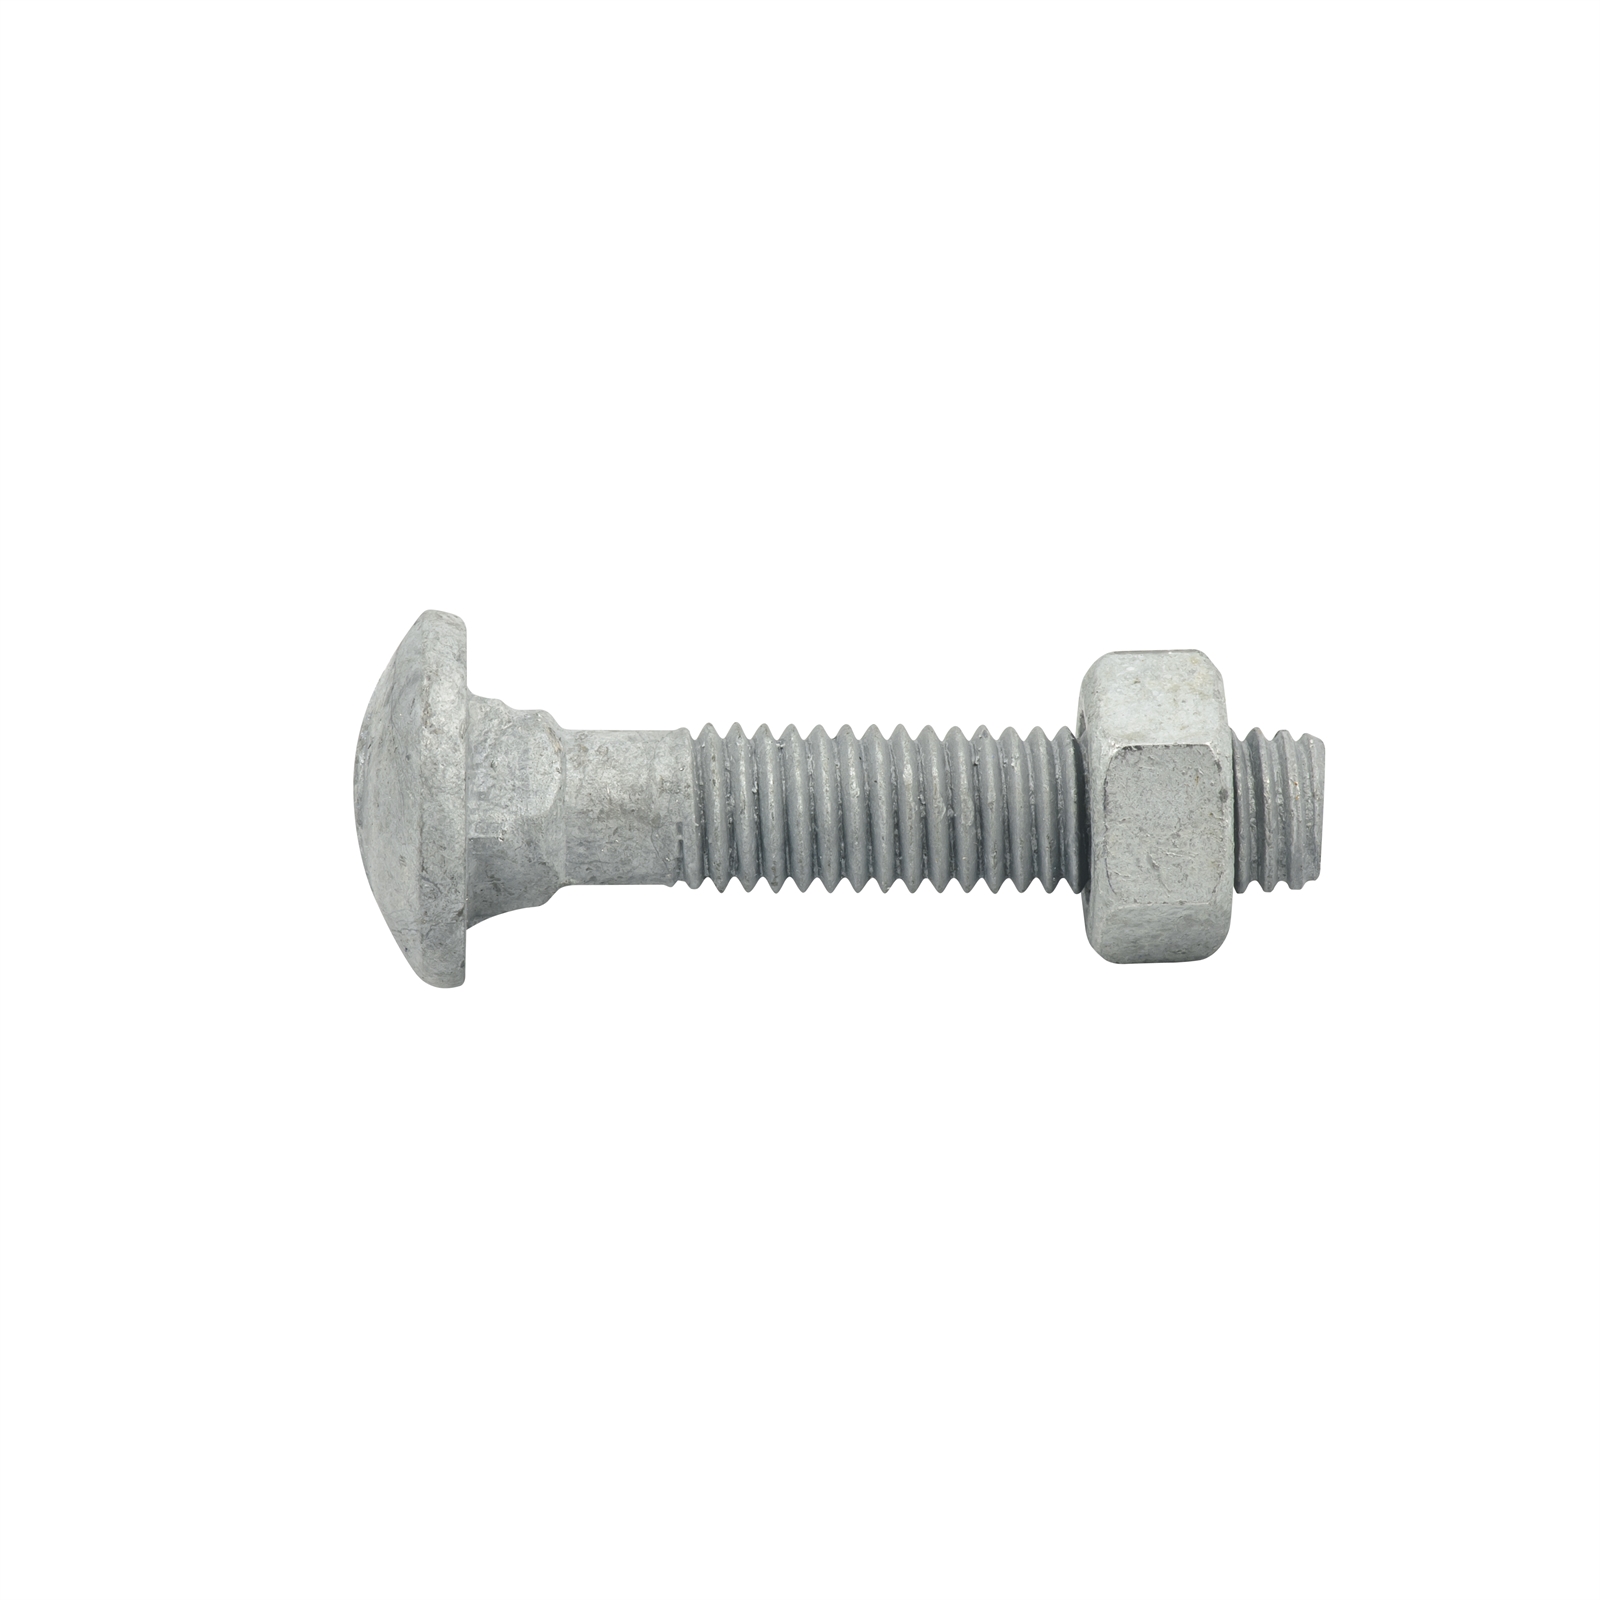 Zenith M8 x 40mm Galvanised Cup Head Bolt and Nut